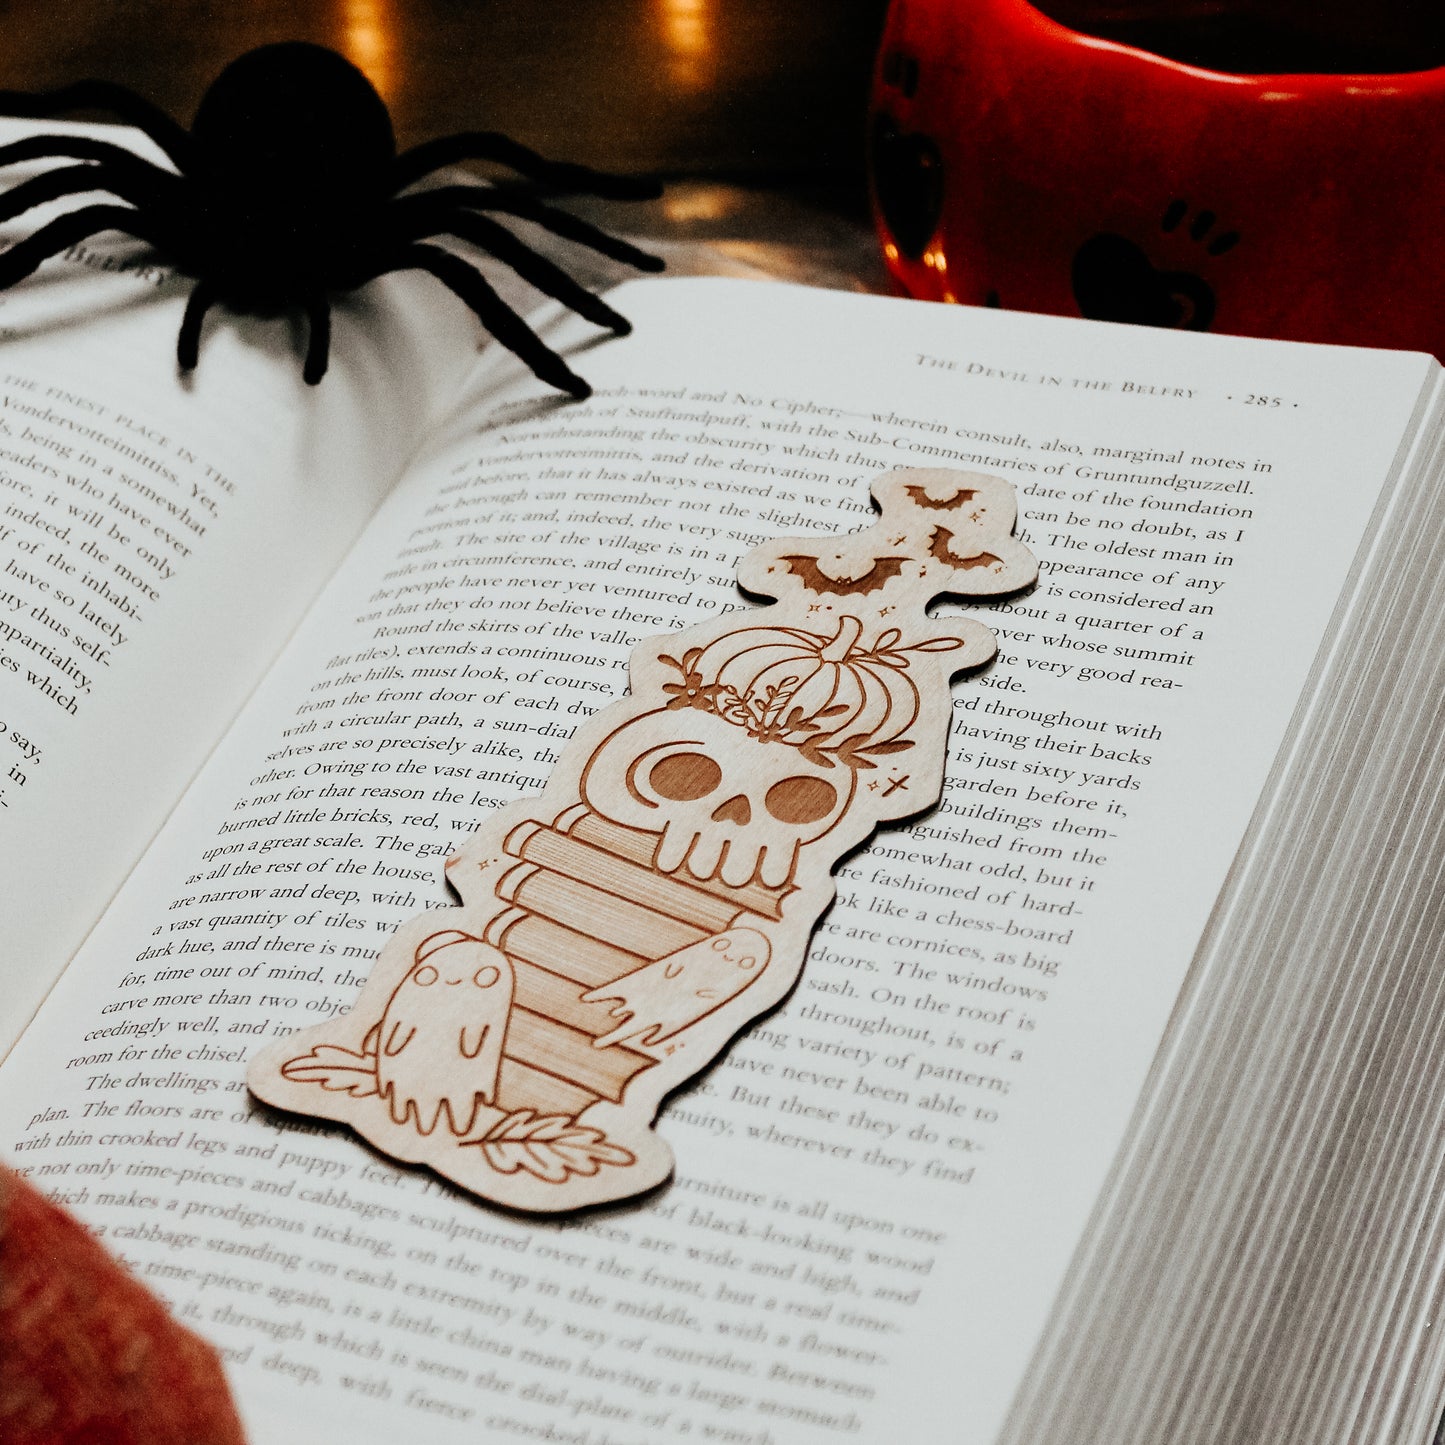 Wooden engraved bookmark with halloween design, including a pumpkin, skull and ghosts, placed on a book with spooky decorations placed around 